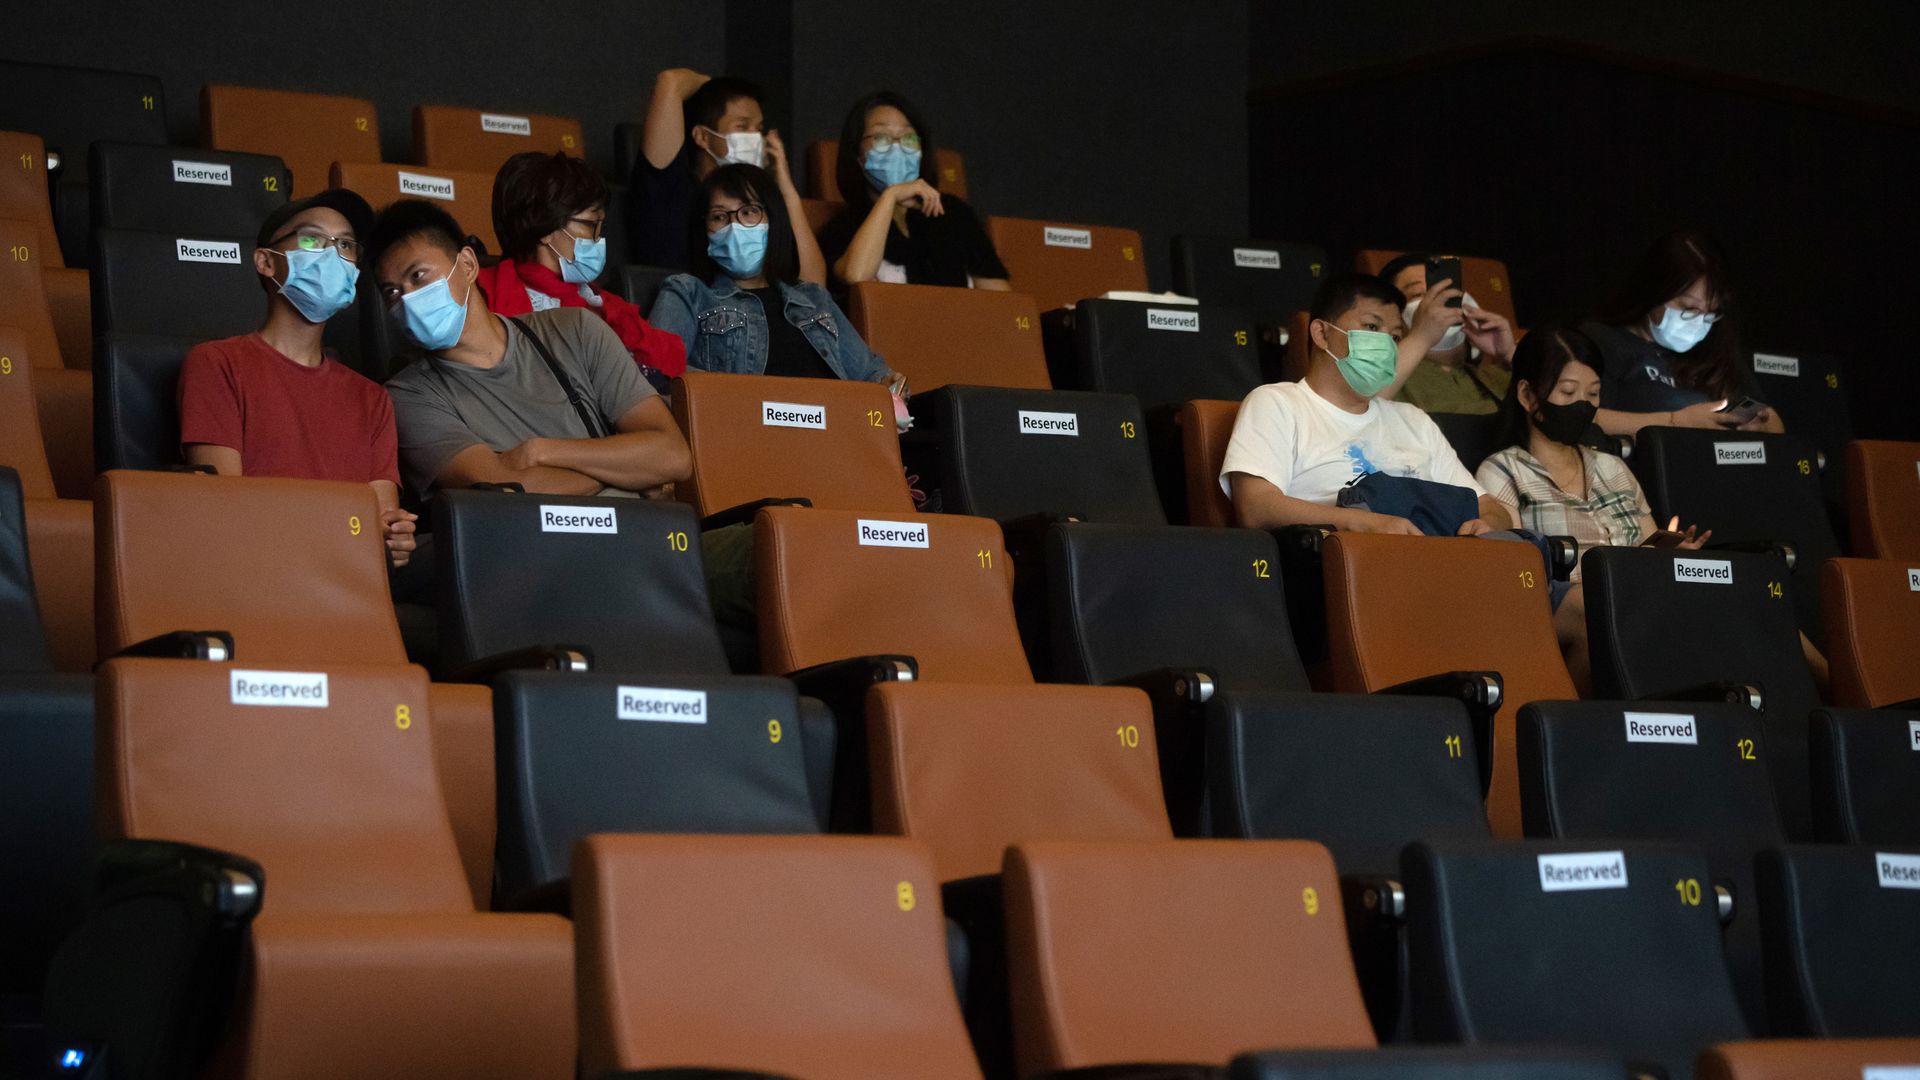 Picture of the inside of a movie theater in Hong Kong with people sitting apart and respecting social distancing measures